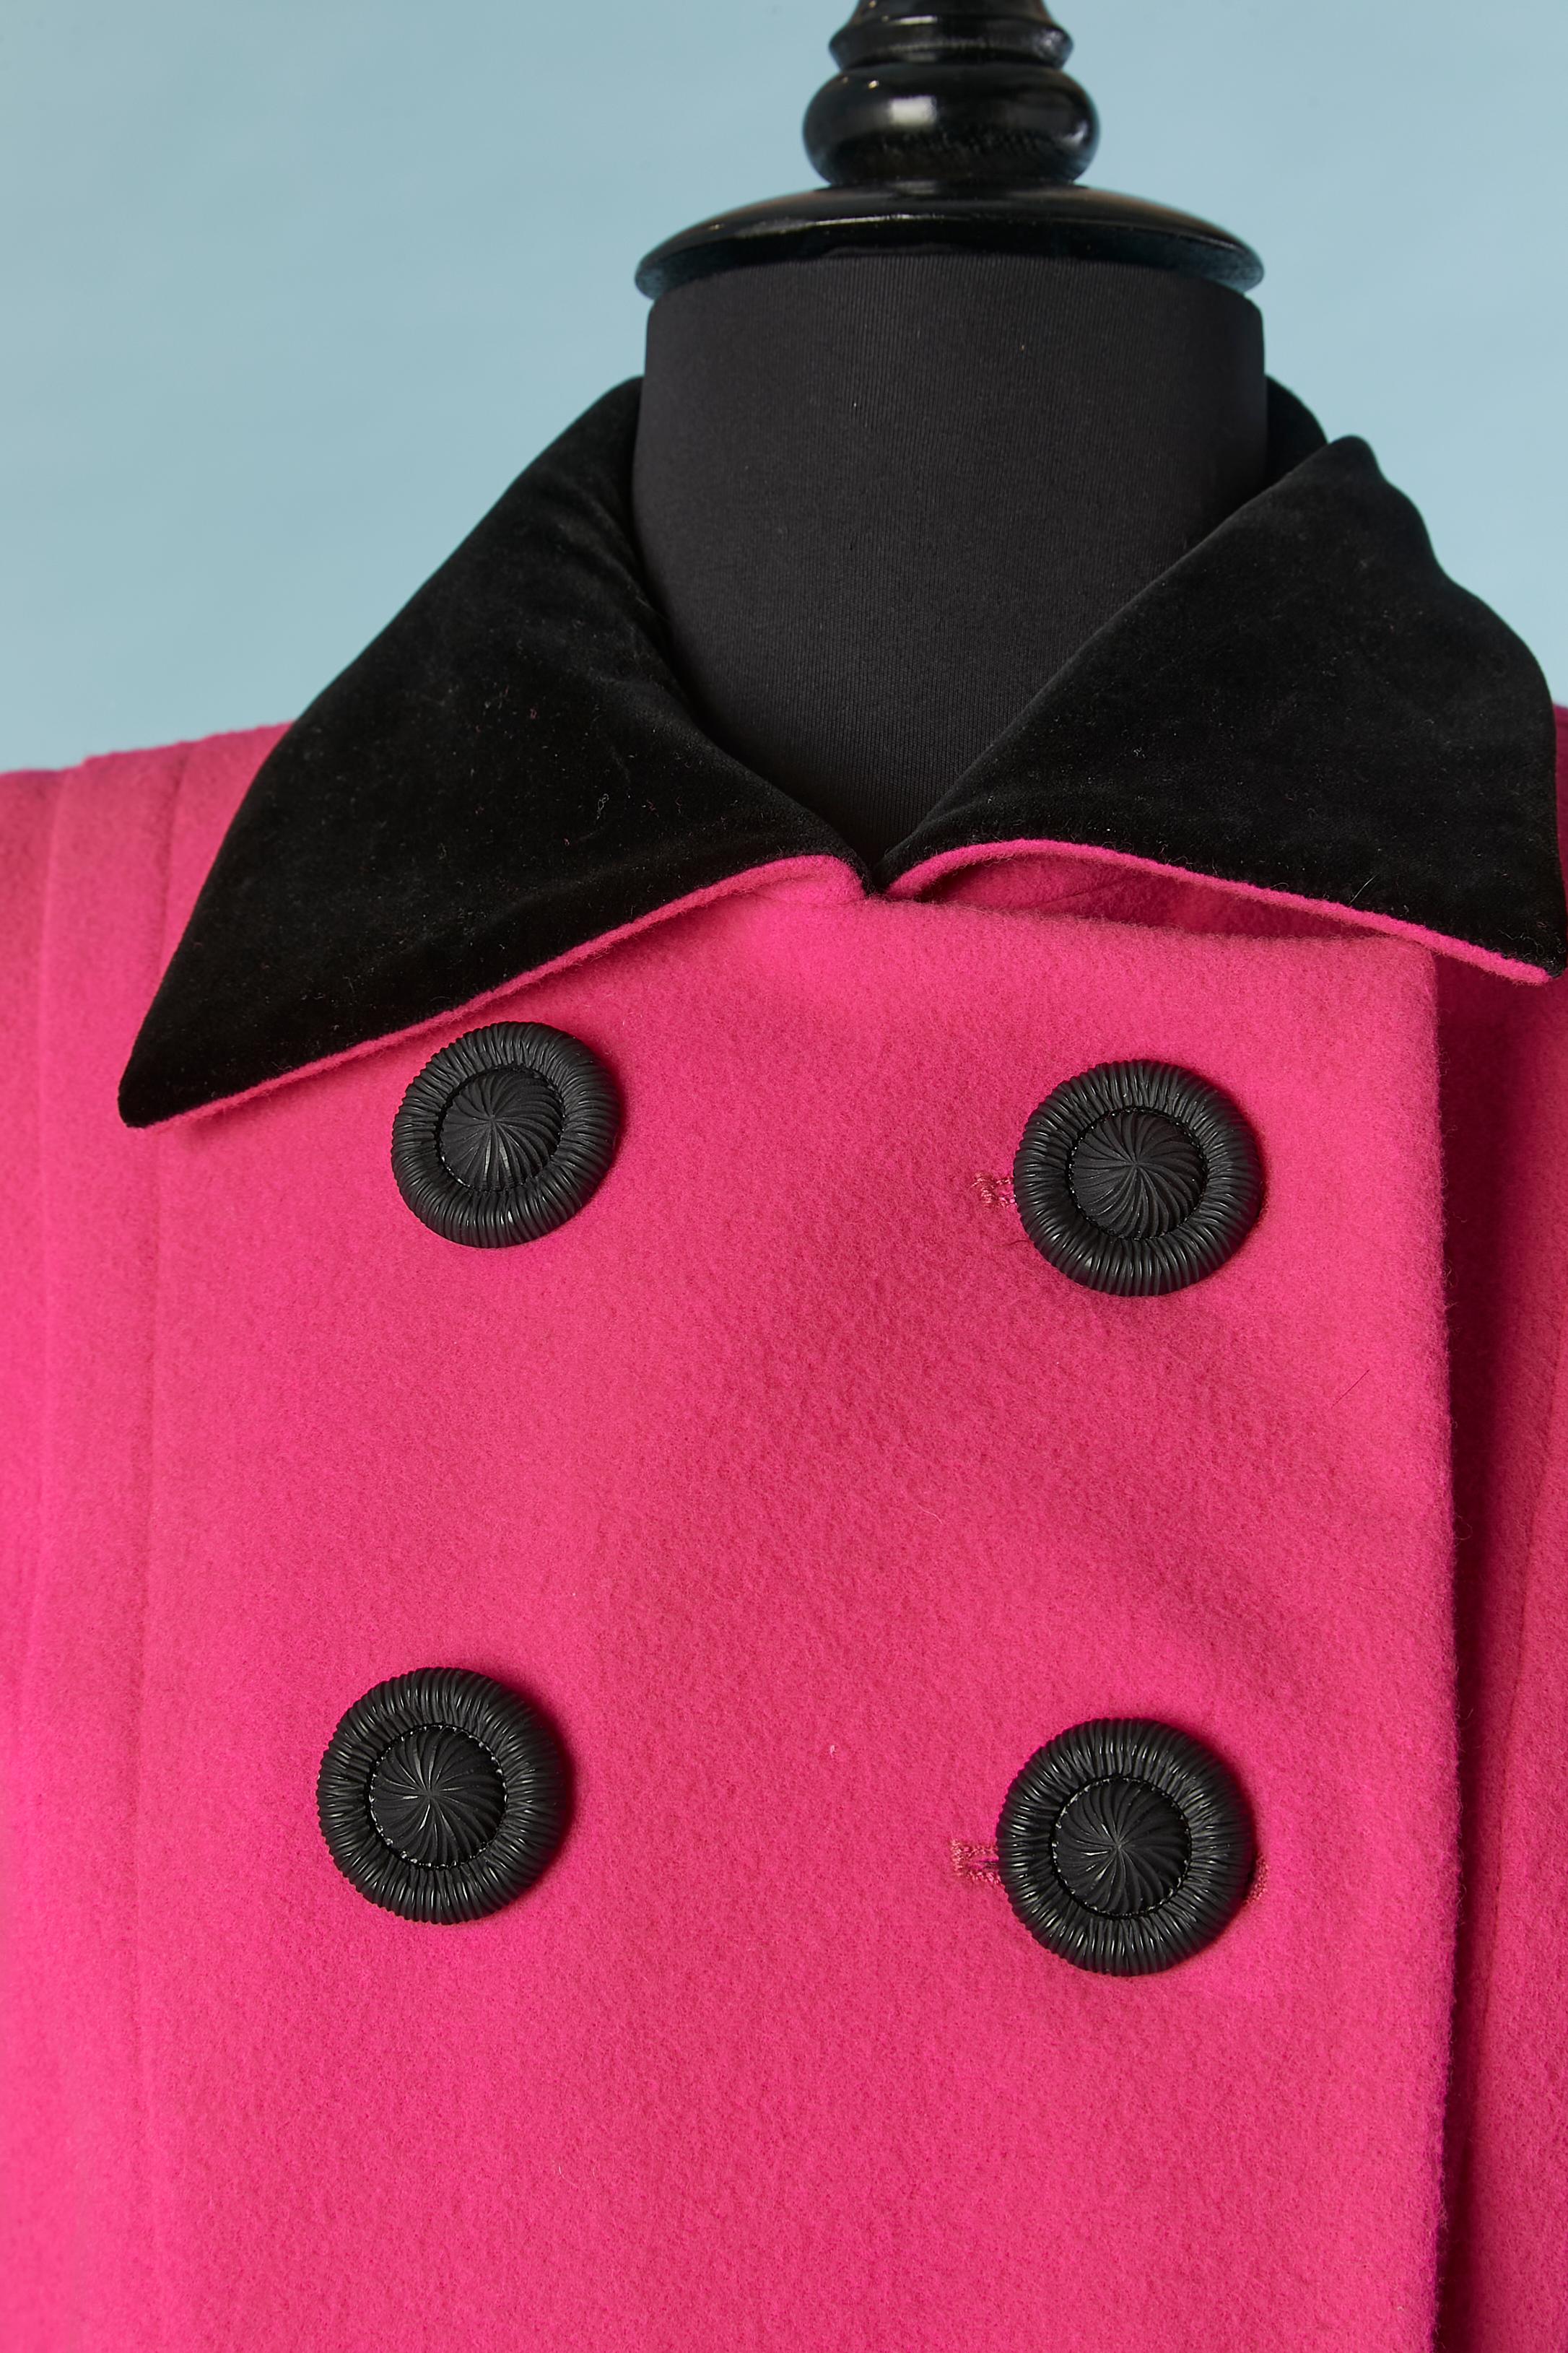 Fushia wool double breasted coat with velvet details . Main fabric composition: 97% wool, 3% cashmere. Acetate lining. 
Shoulder-pad. Pockets on both side. 
SIZE 38 (Fr) M 